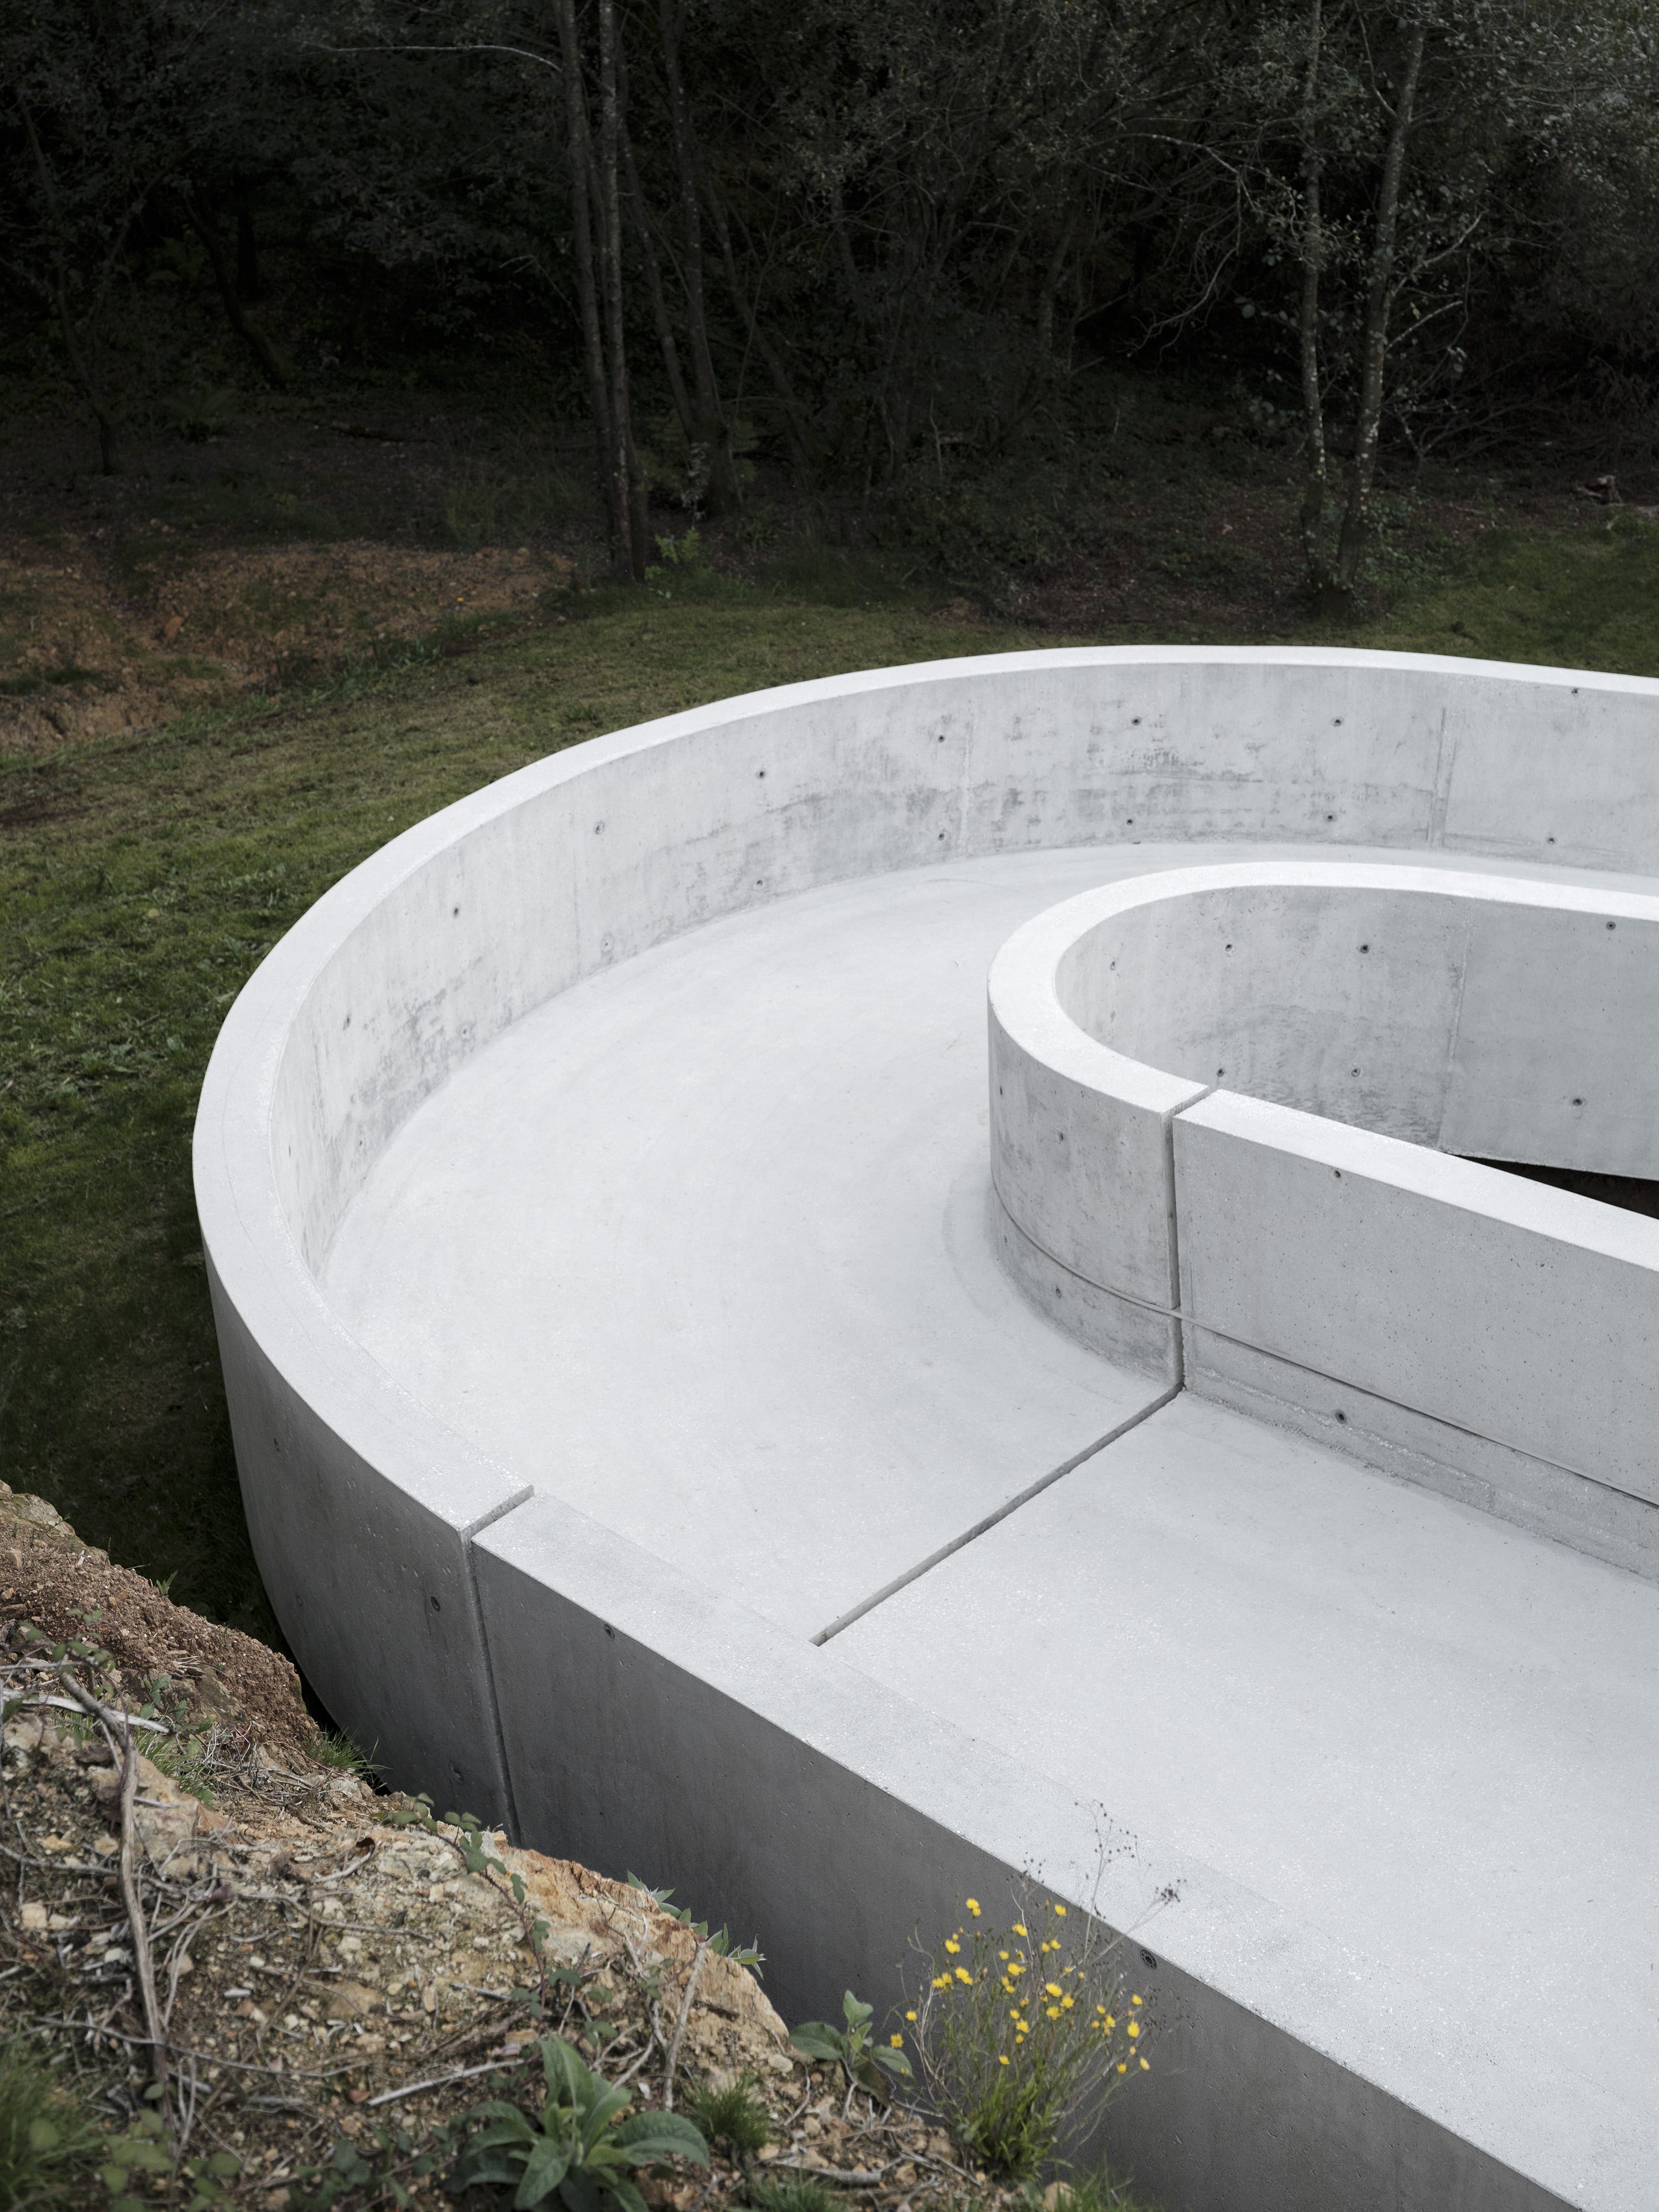 The ramp is constructed with 'U'-shaped precast concrete construction